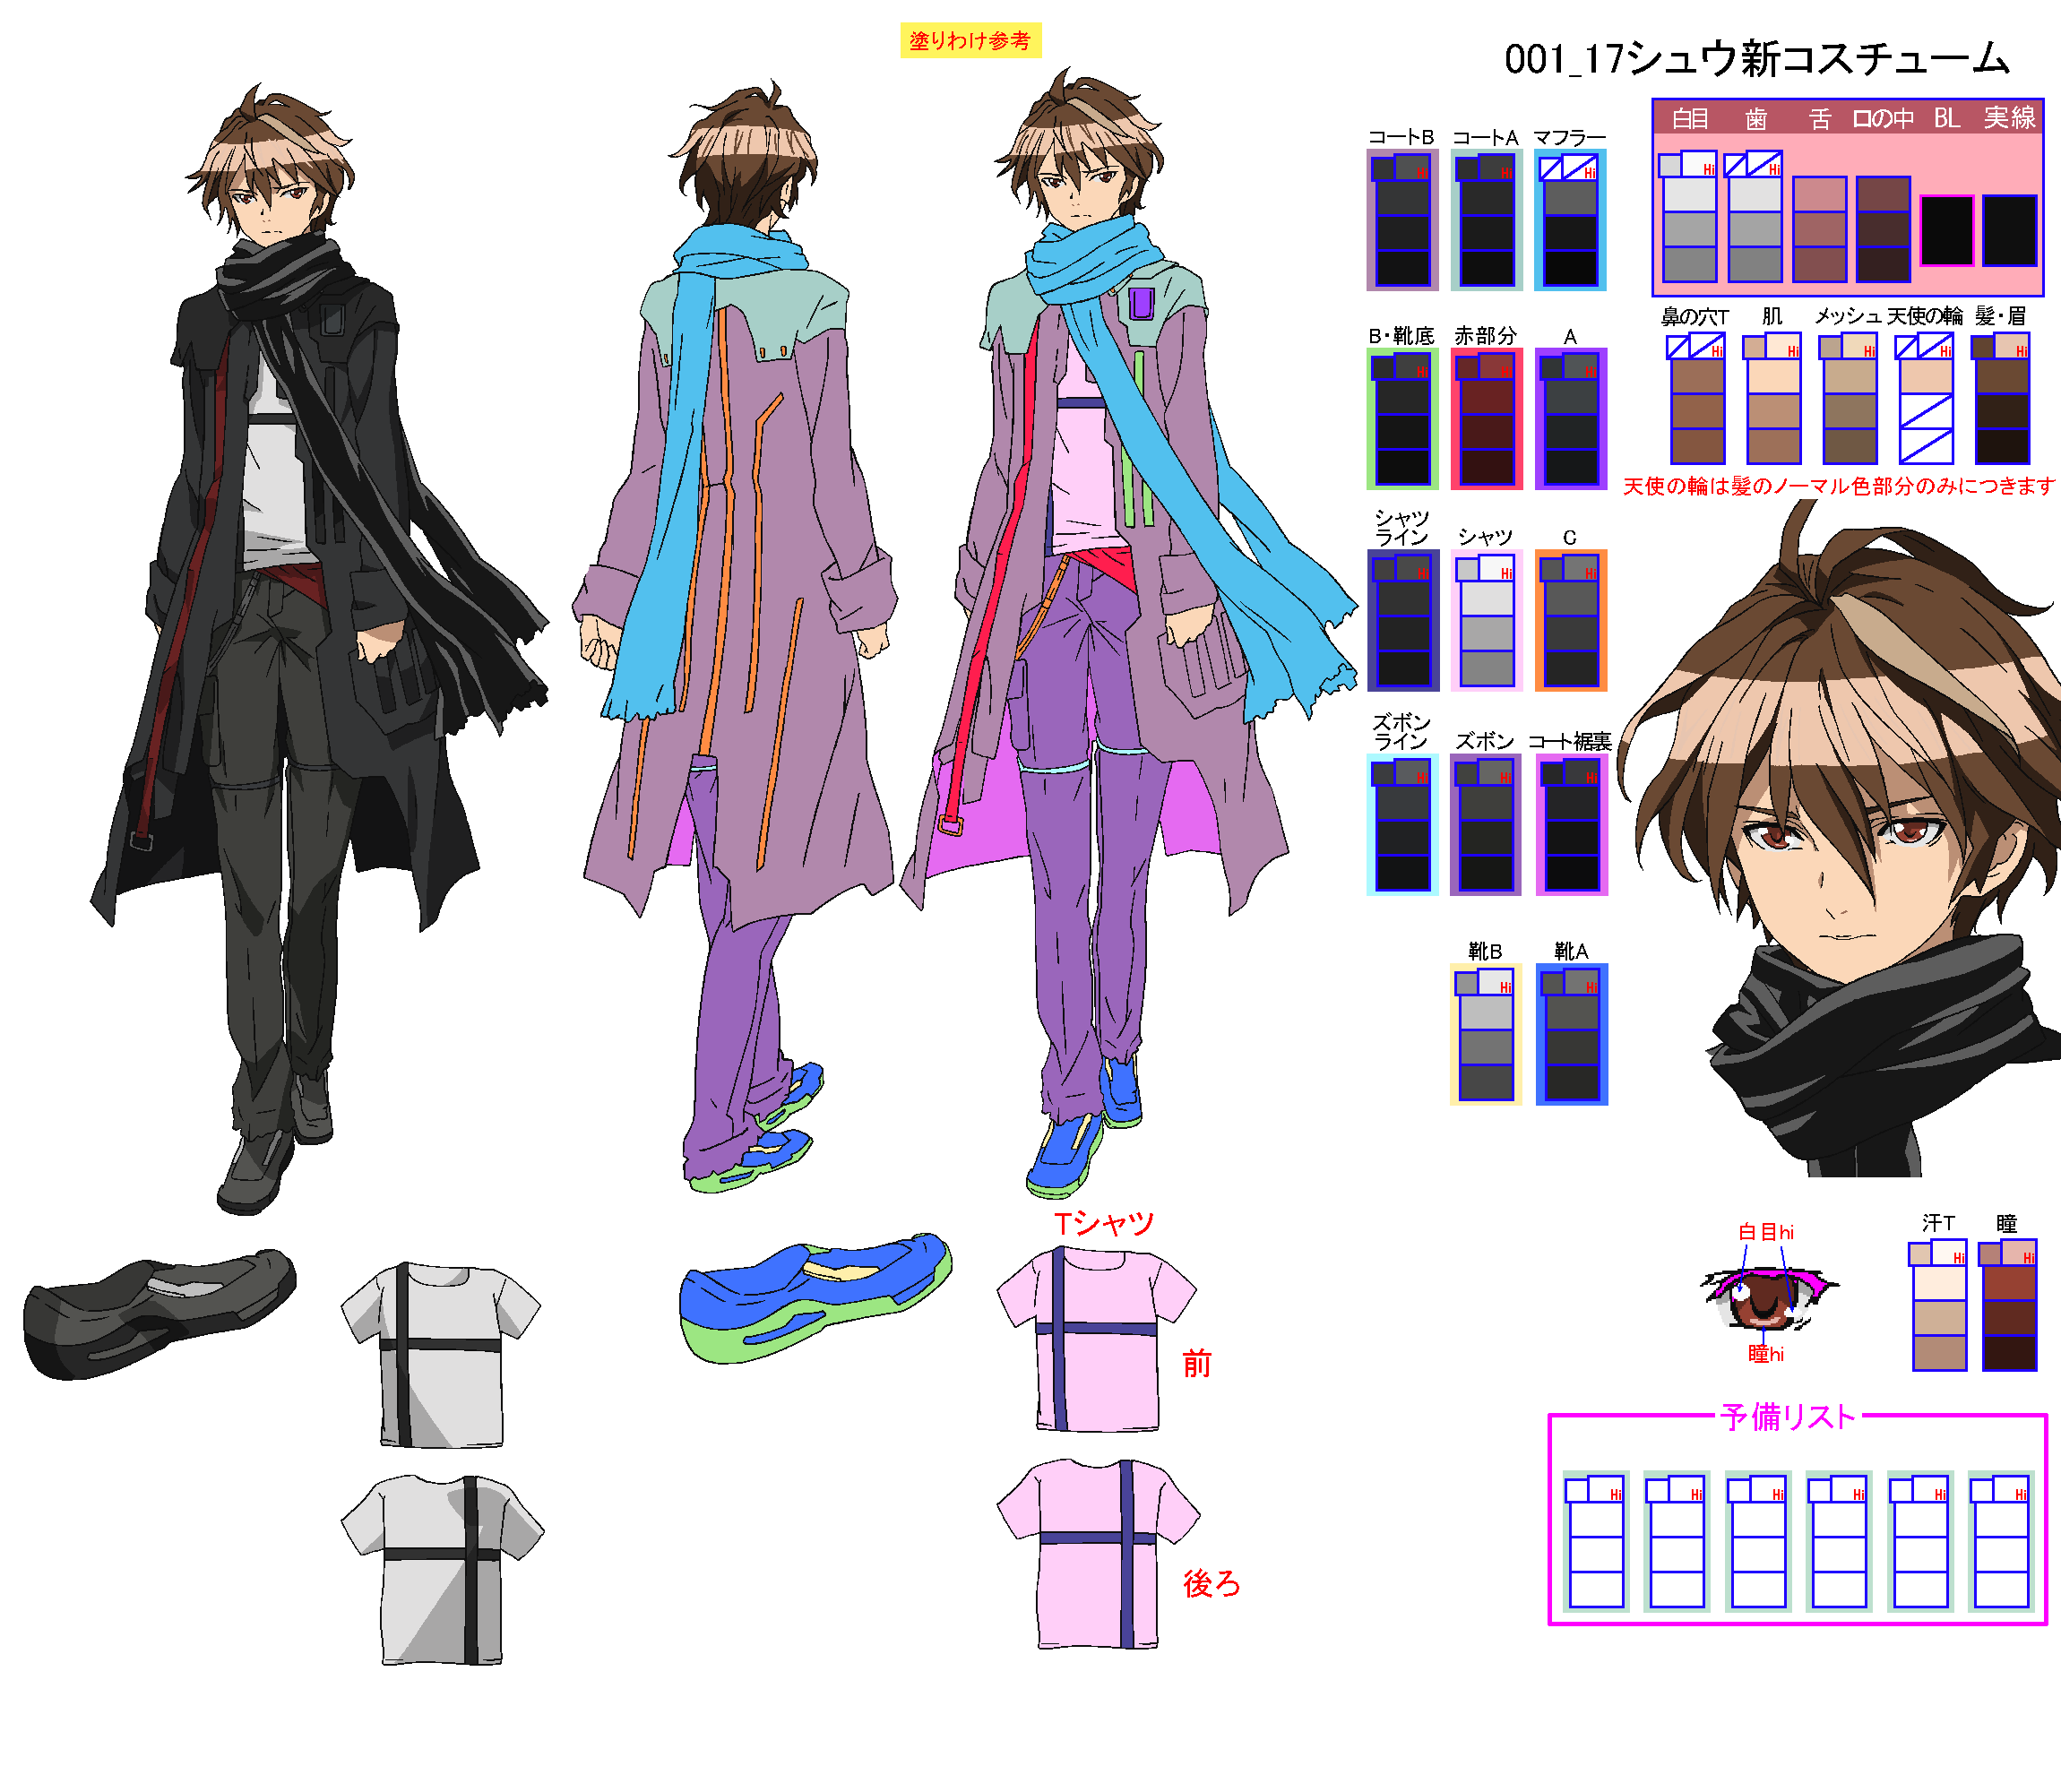 Setteidreams 在 Twitter 上 Color Designs From Guilty Crown Guiltycrown ギルティクラウン Settei 設定 Modelsheet Anime Conceptart Charactersheet Characterdesign Lineart Design Animation Colordesign T Co 26trhxsvbh Twitter